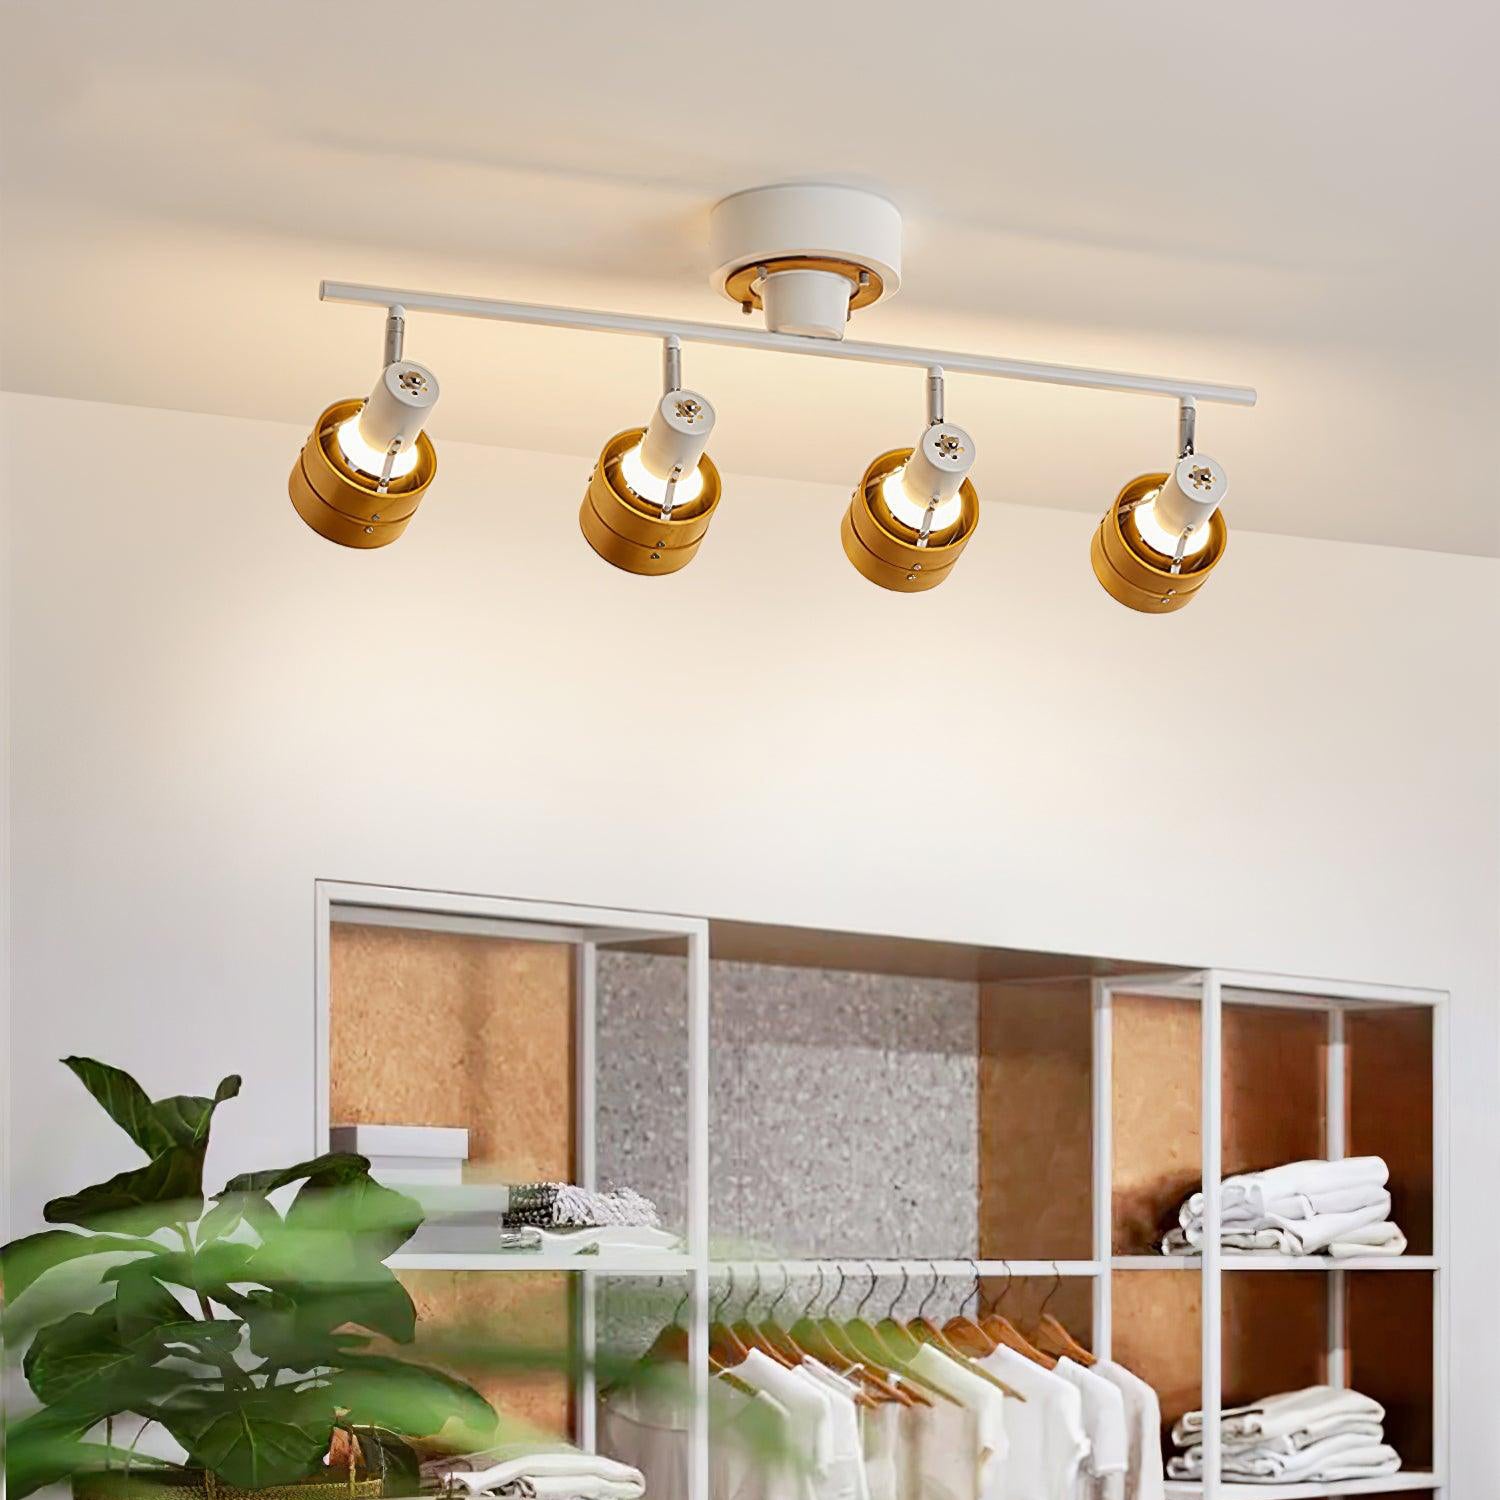 Cool Track Lighting Systems: Practical Guide and  Product Recommendations